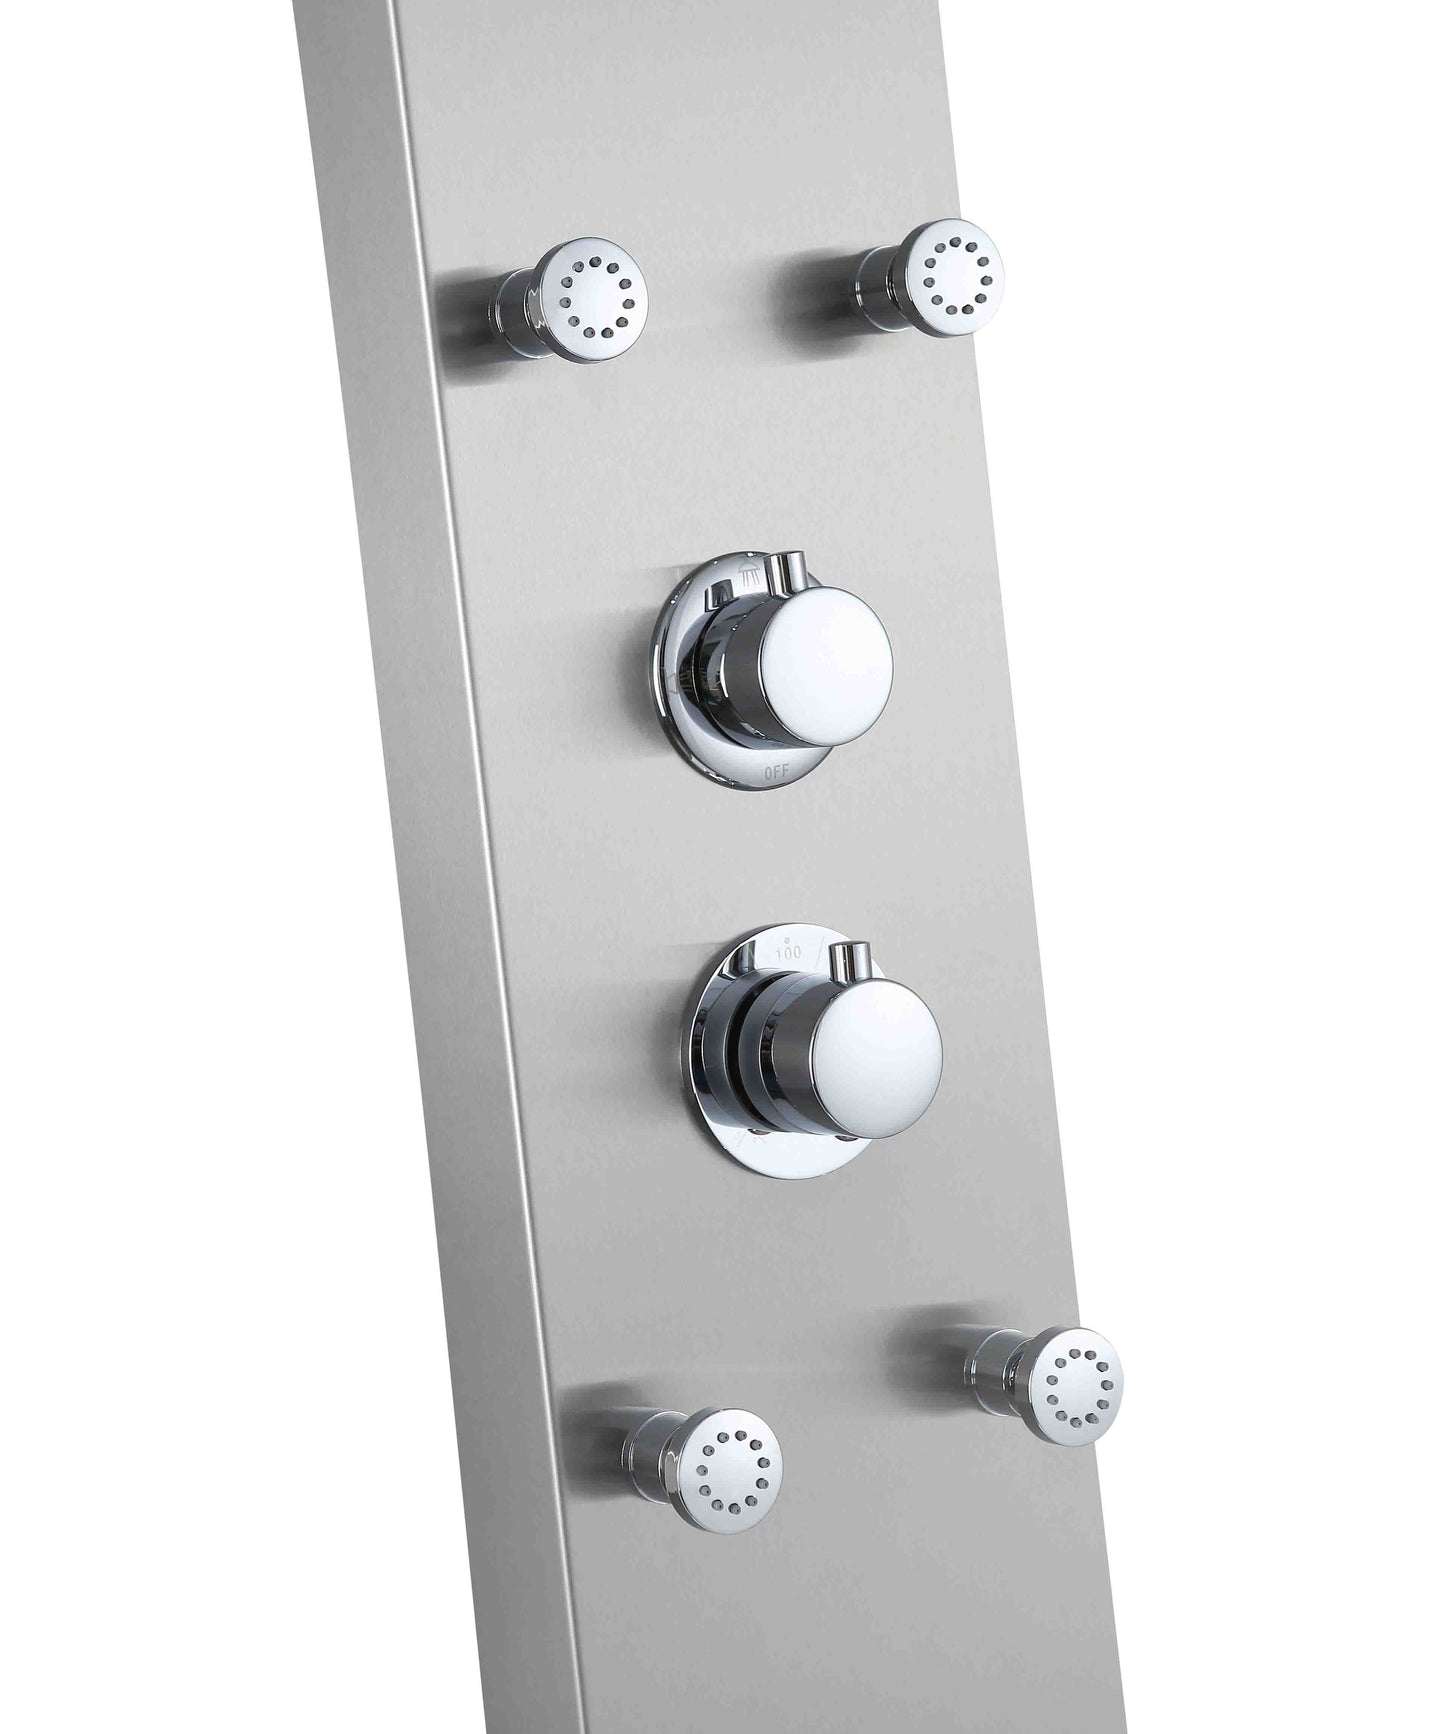 Eviva Rainmaker Thermostatic Massage -Jet Shower Tower System in Brushed silver finish